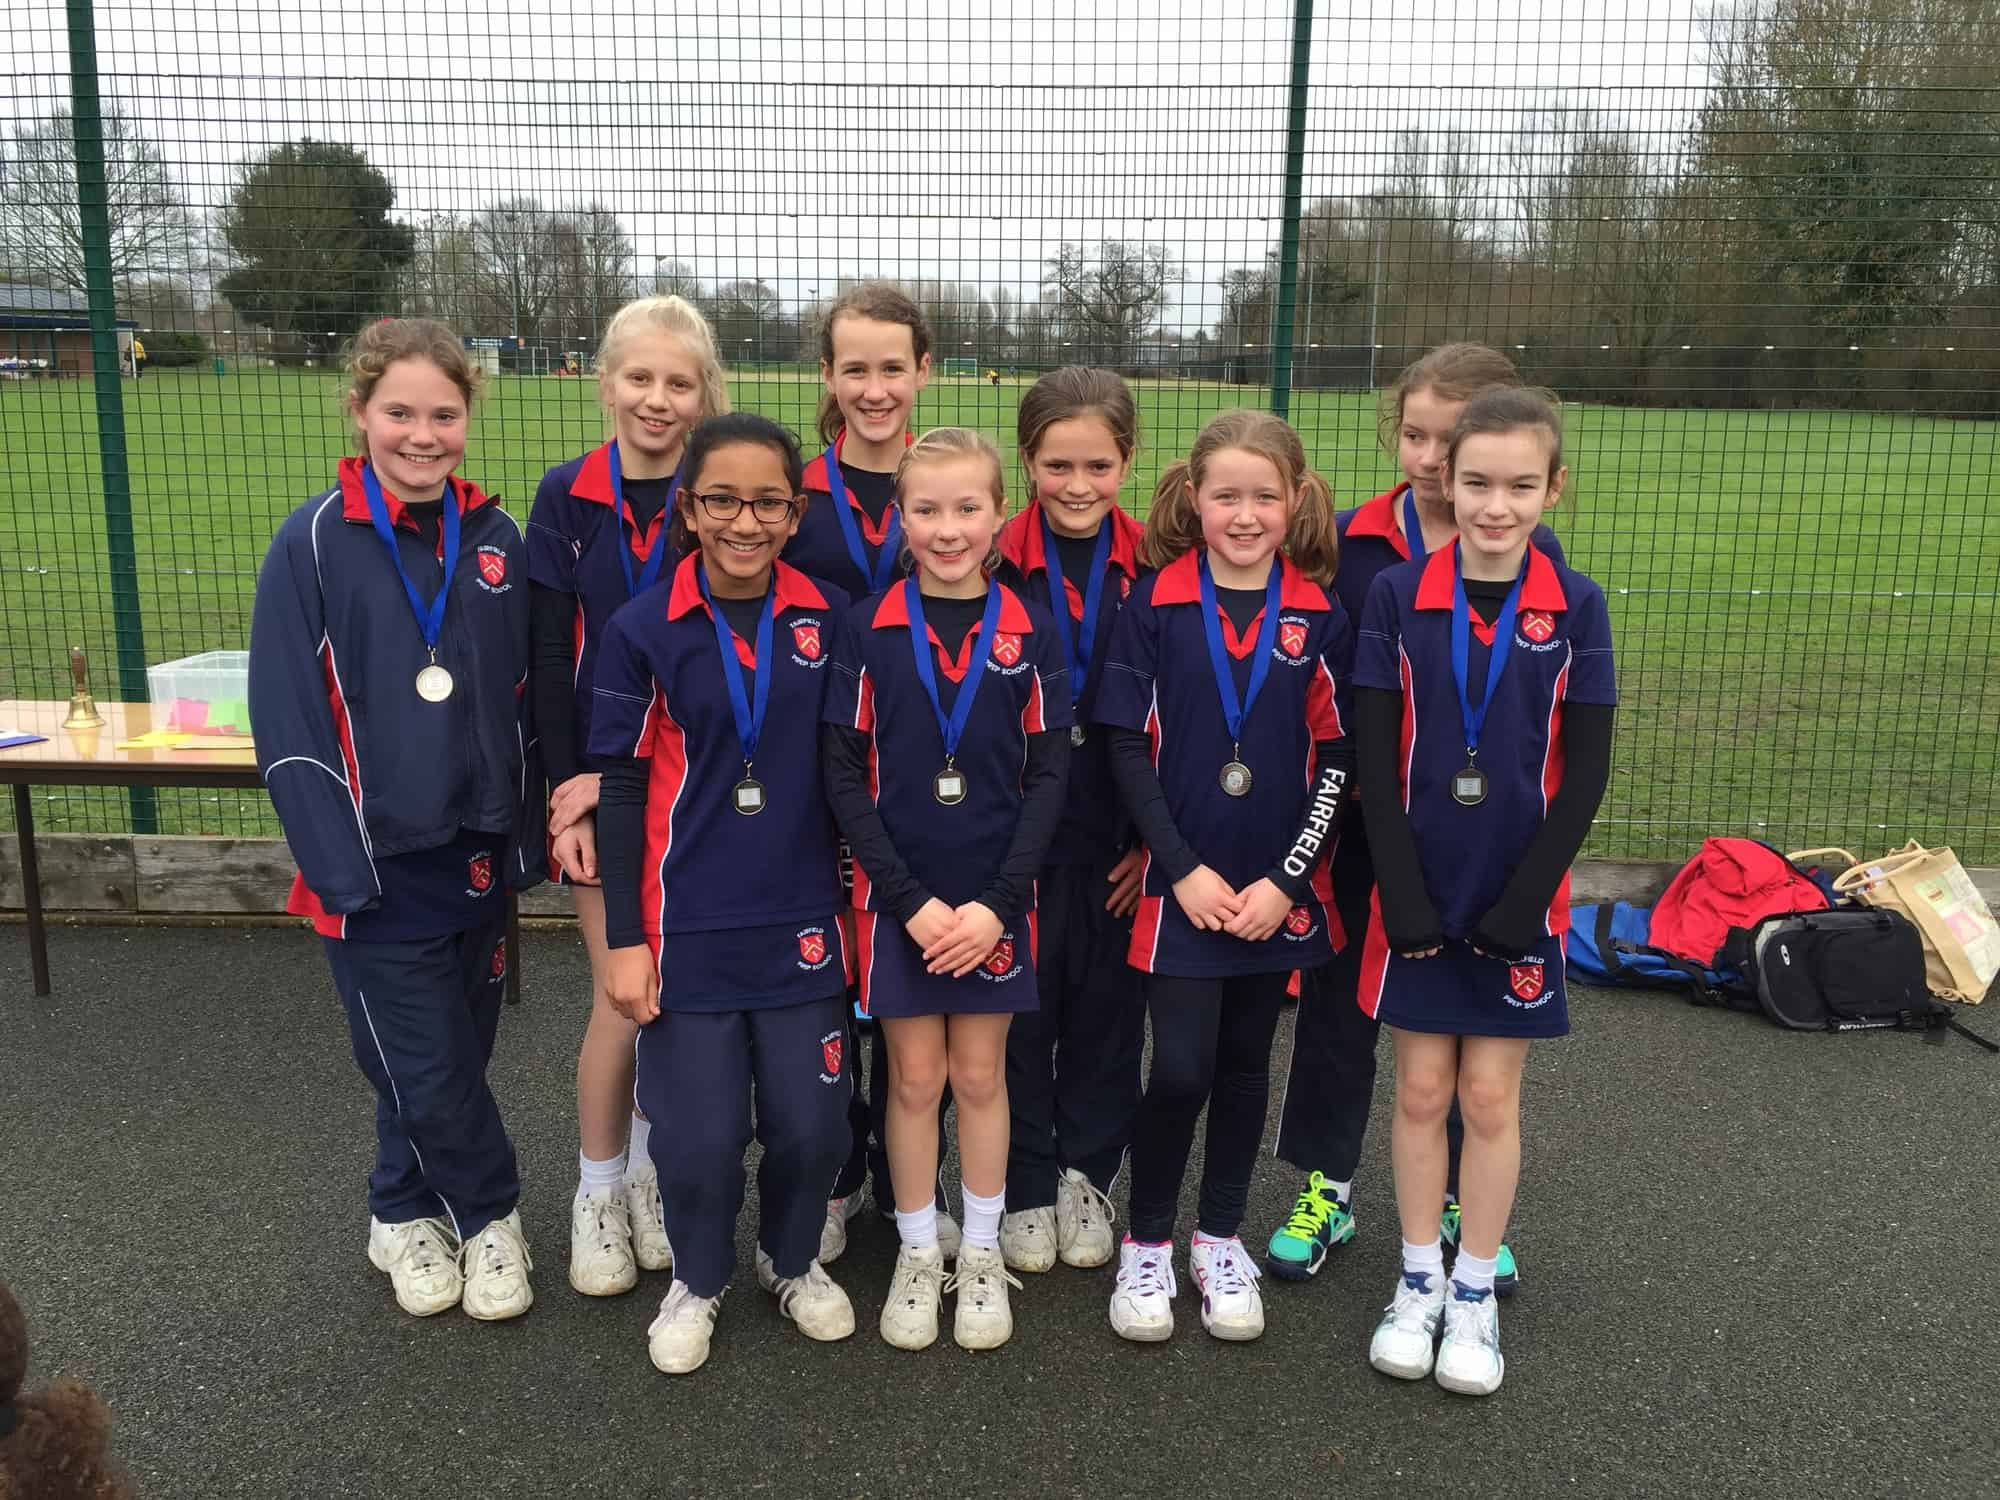 Silver medals for Fairfield’s U11 netball team featured image